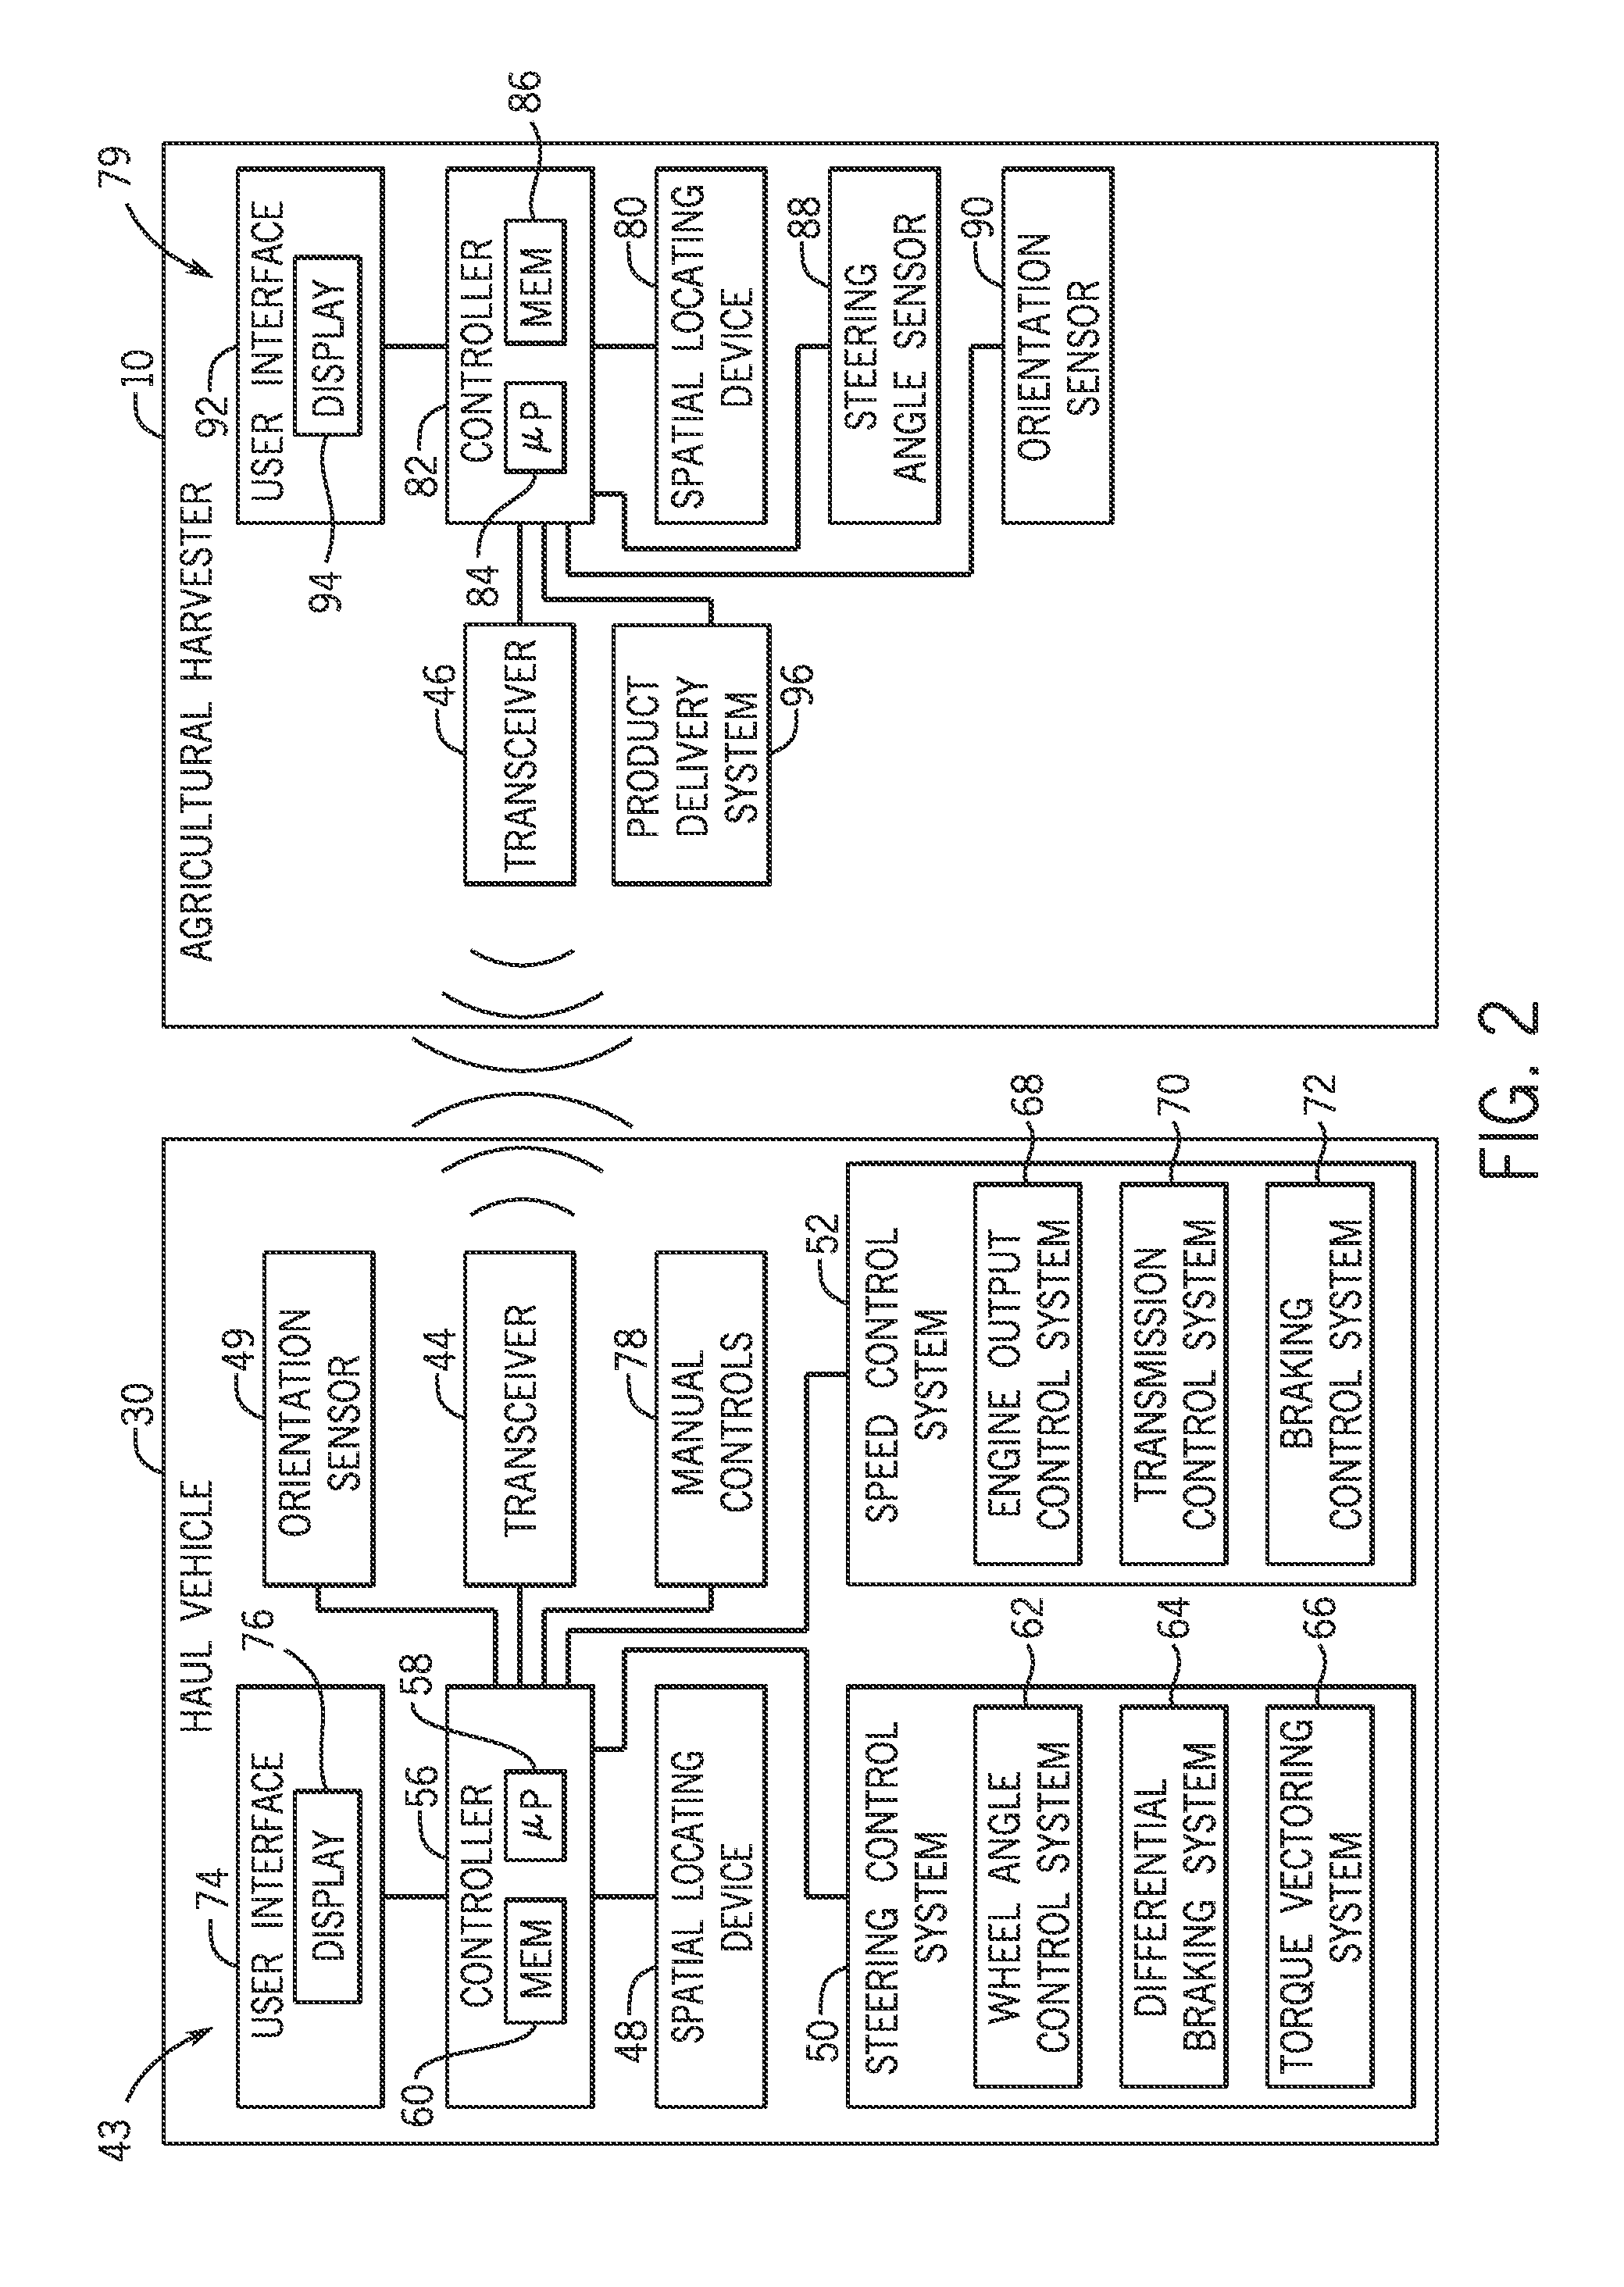 System and method for coordinated control of agricultural vehicles